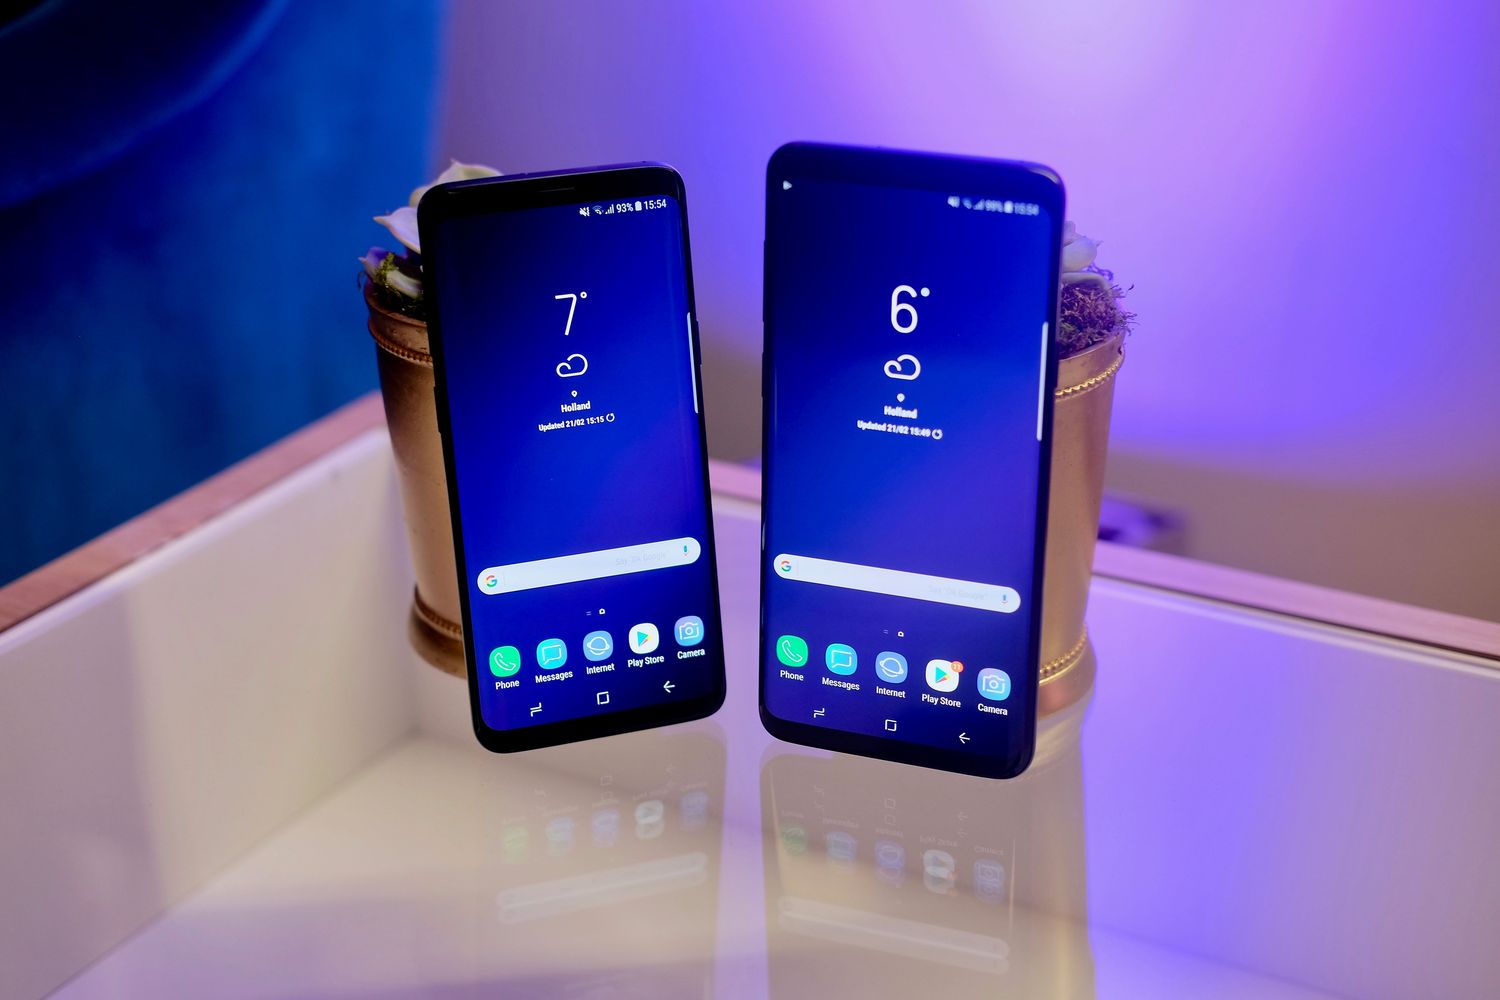 t-mobile-offers-new-galaxy-s9-and-s9-plus-by-breaking-world-records